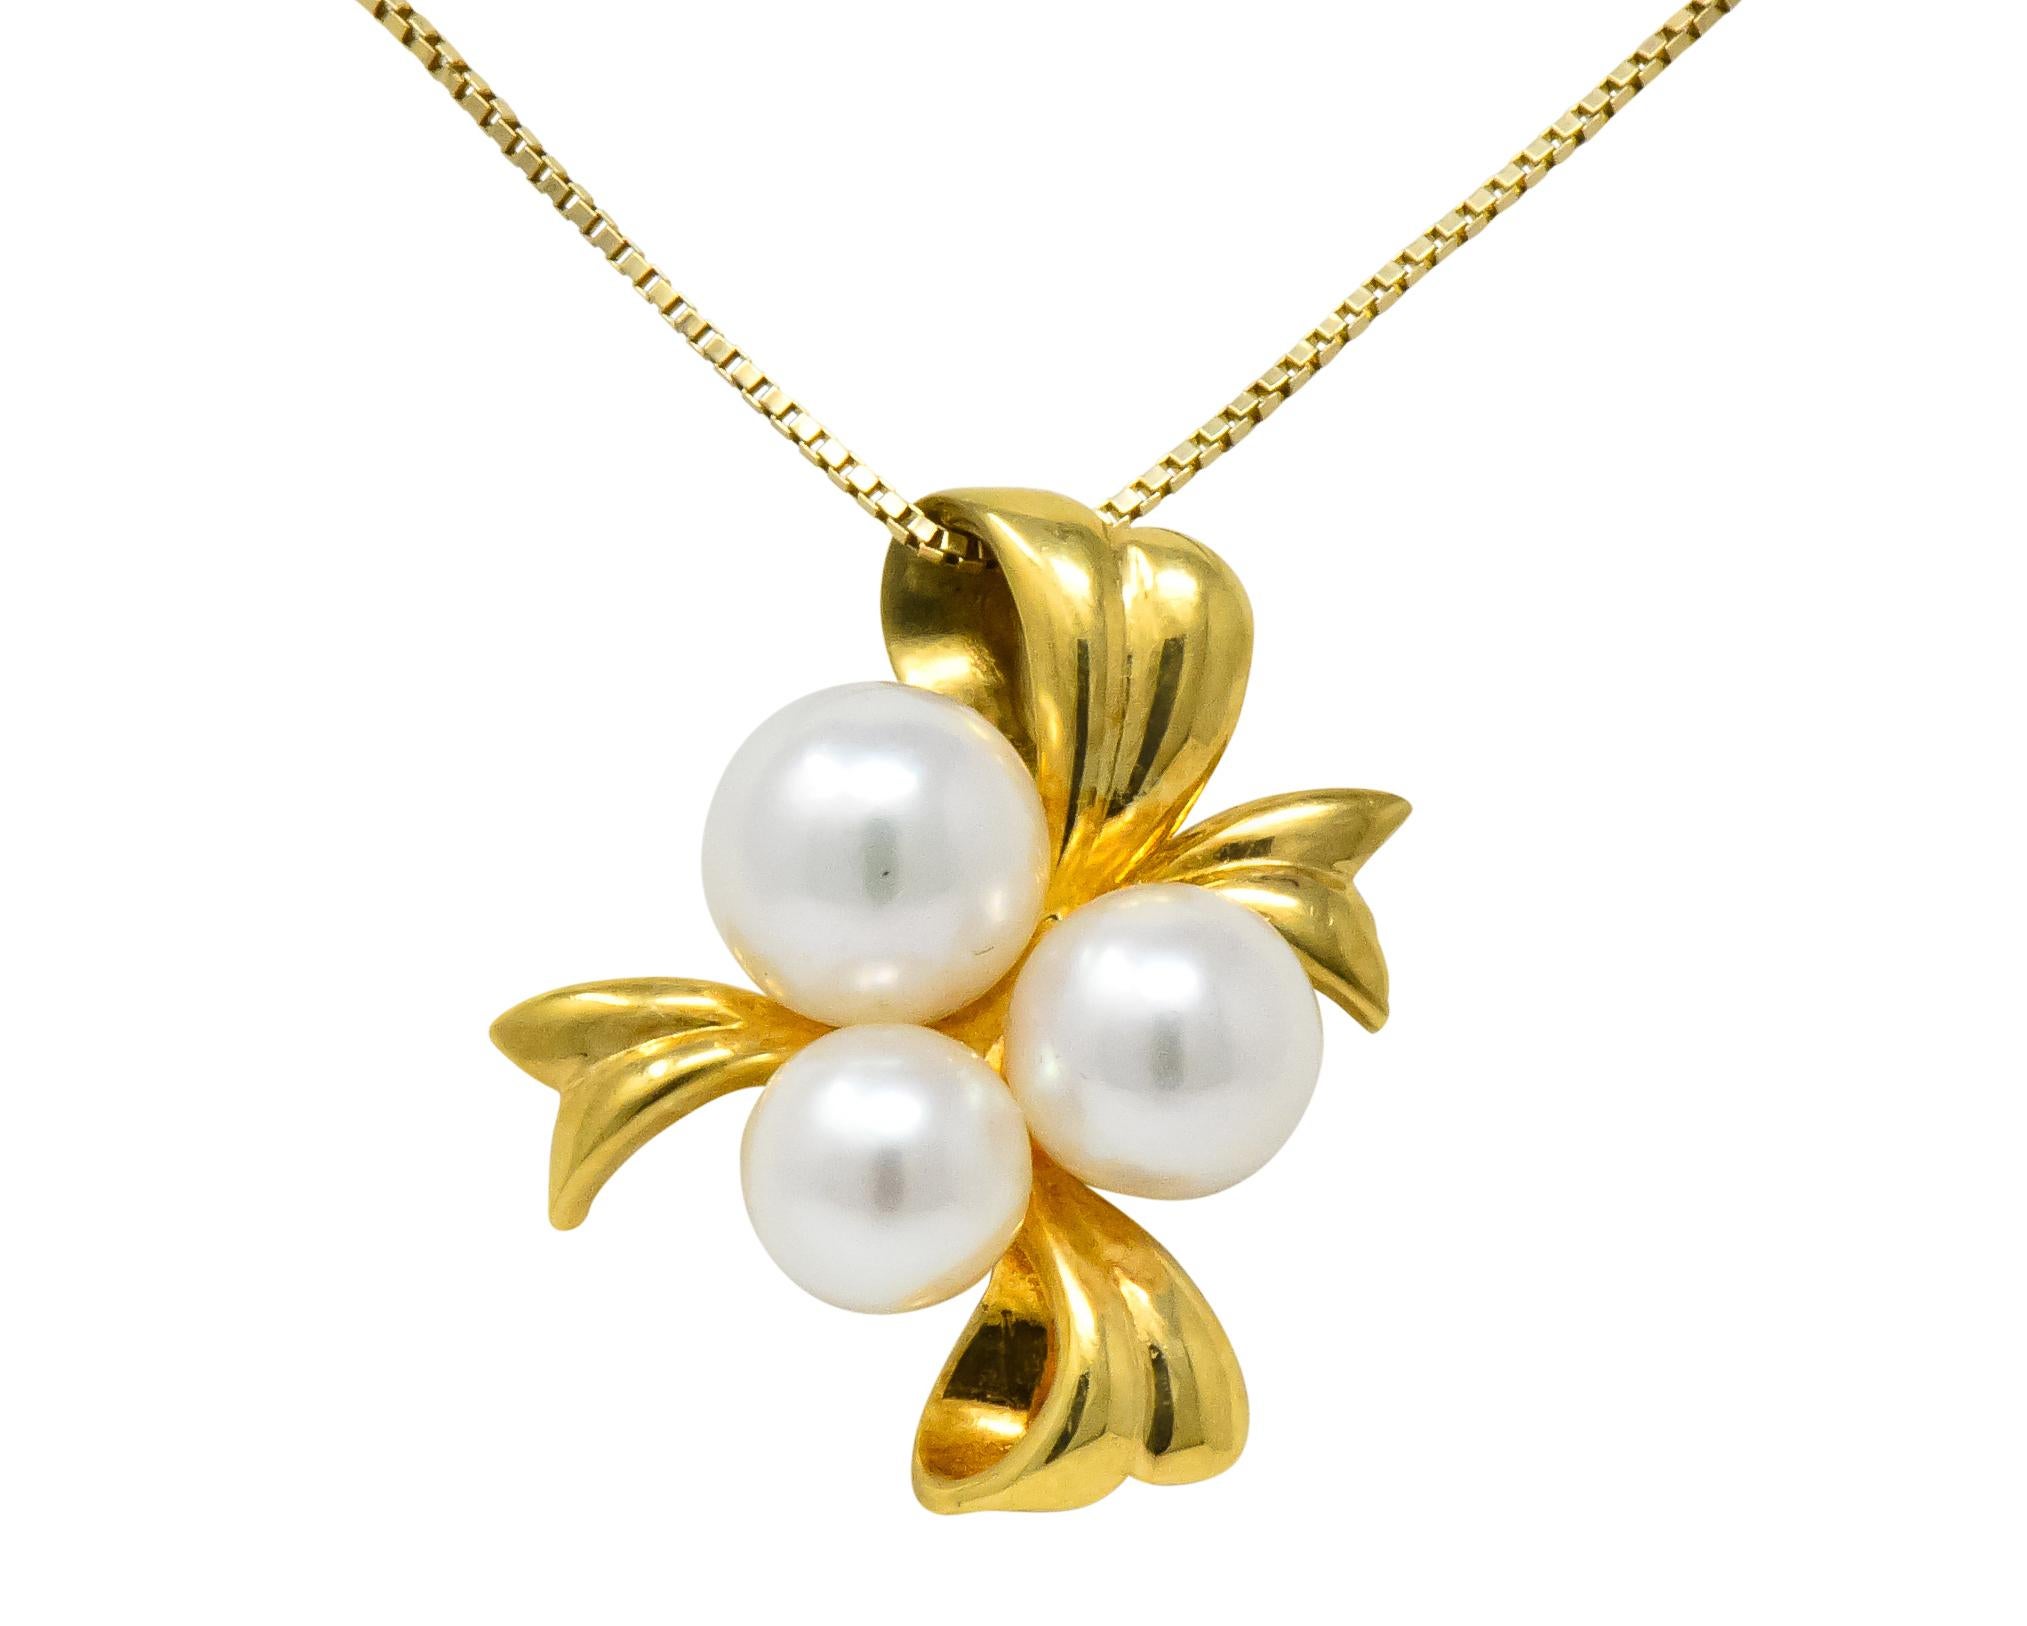 Centering an 18 karat gold pendant designed as ribbon with three round natural freshwater cultured pearls, white in color with rosé overtone and very good luster

Accompanied by 14 karat gold box chain, completed by lobster clasp stamped 14kt, Made